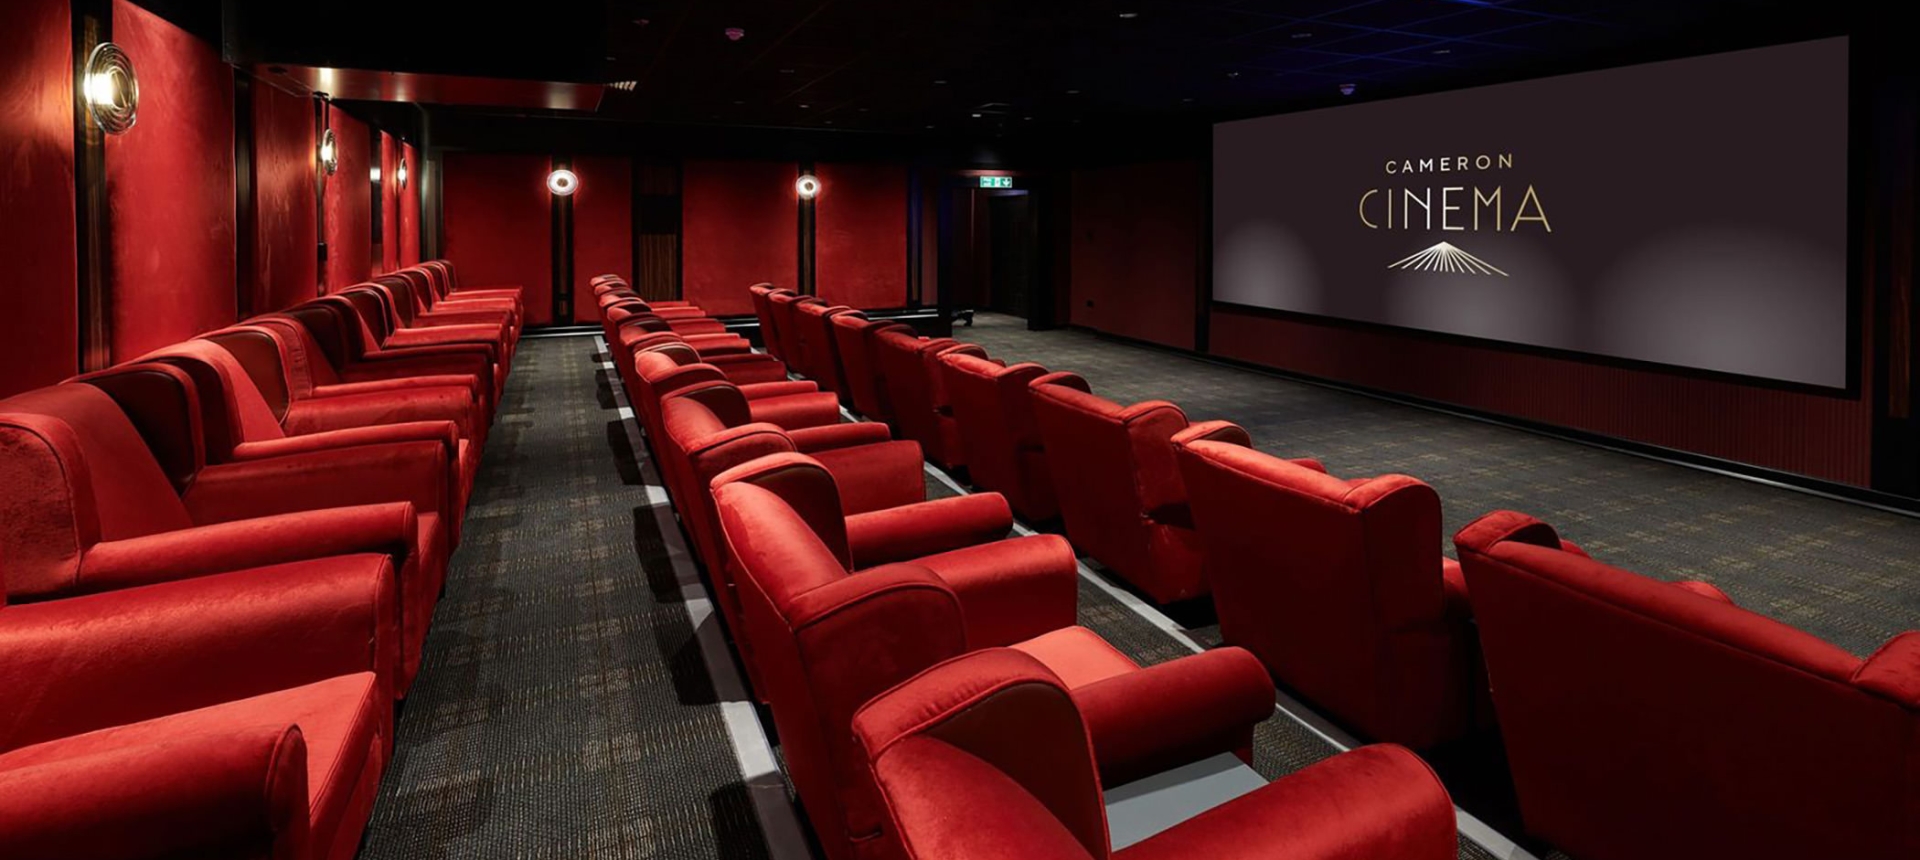 Cameron cinema located in Cameron house with rows of seating available